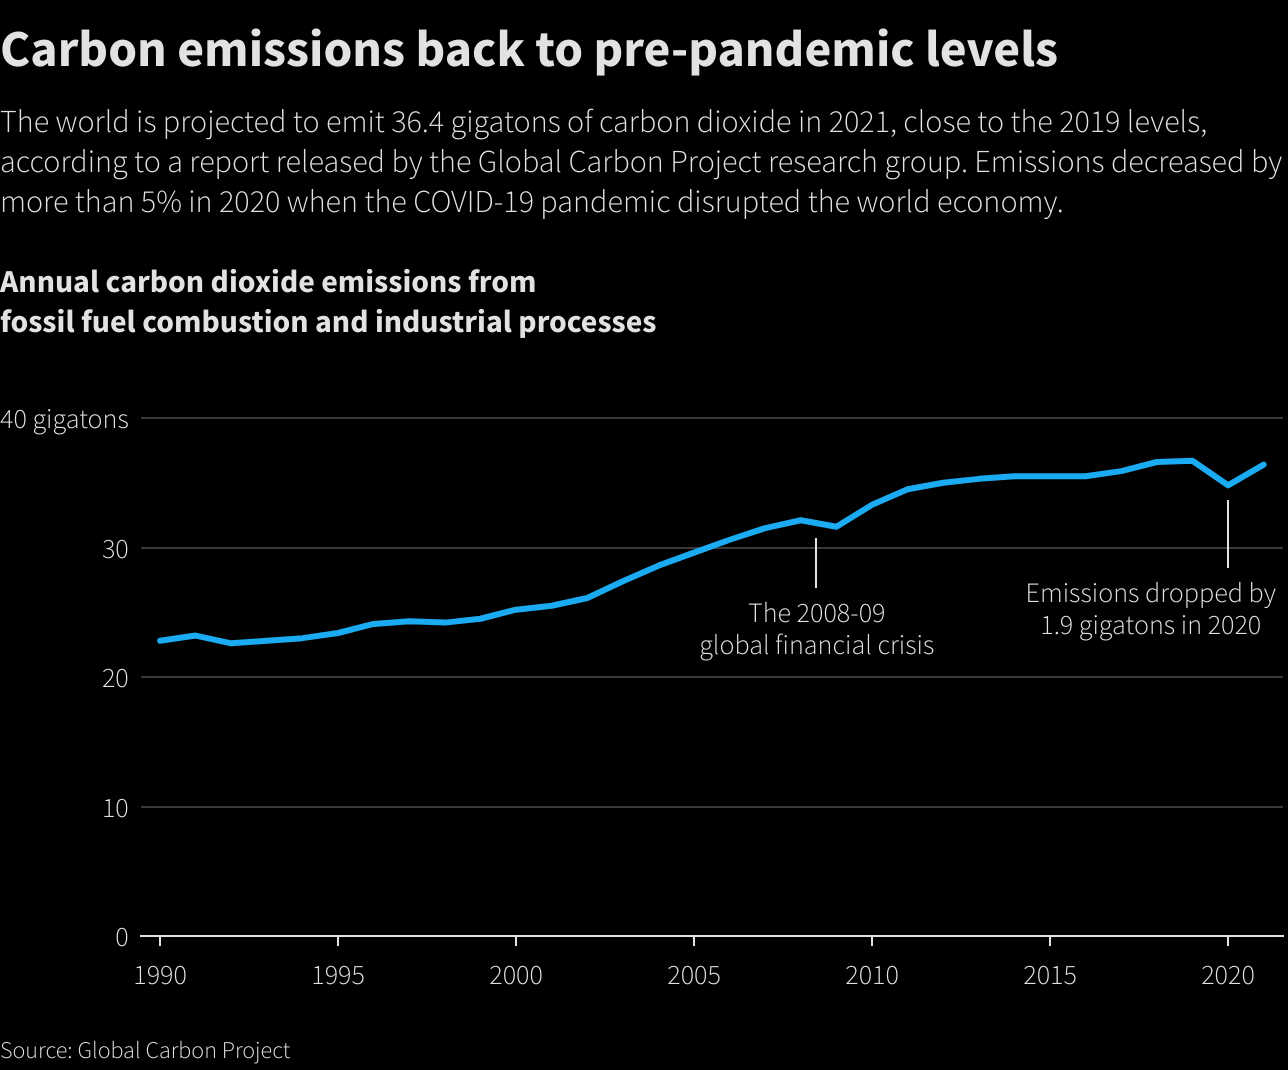 The world is projected to emit 36.4 gigatons of carbon dioxide in 2021, close to the 2019 levels, according to a report released by the Global Carbon Project research group.